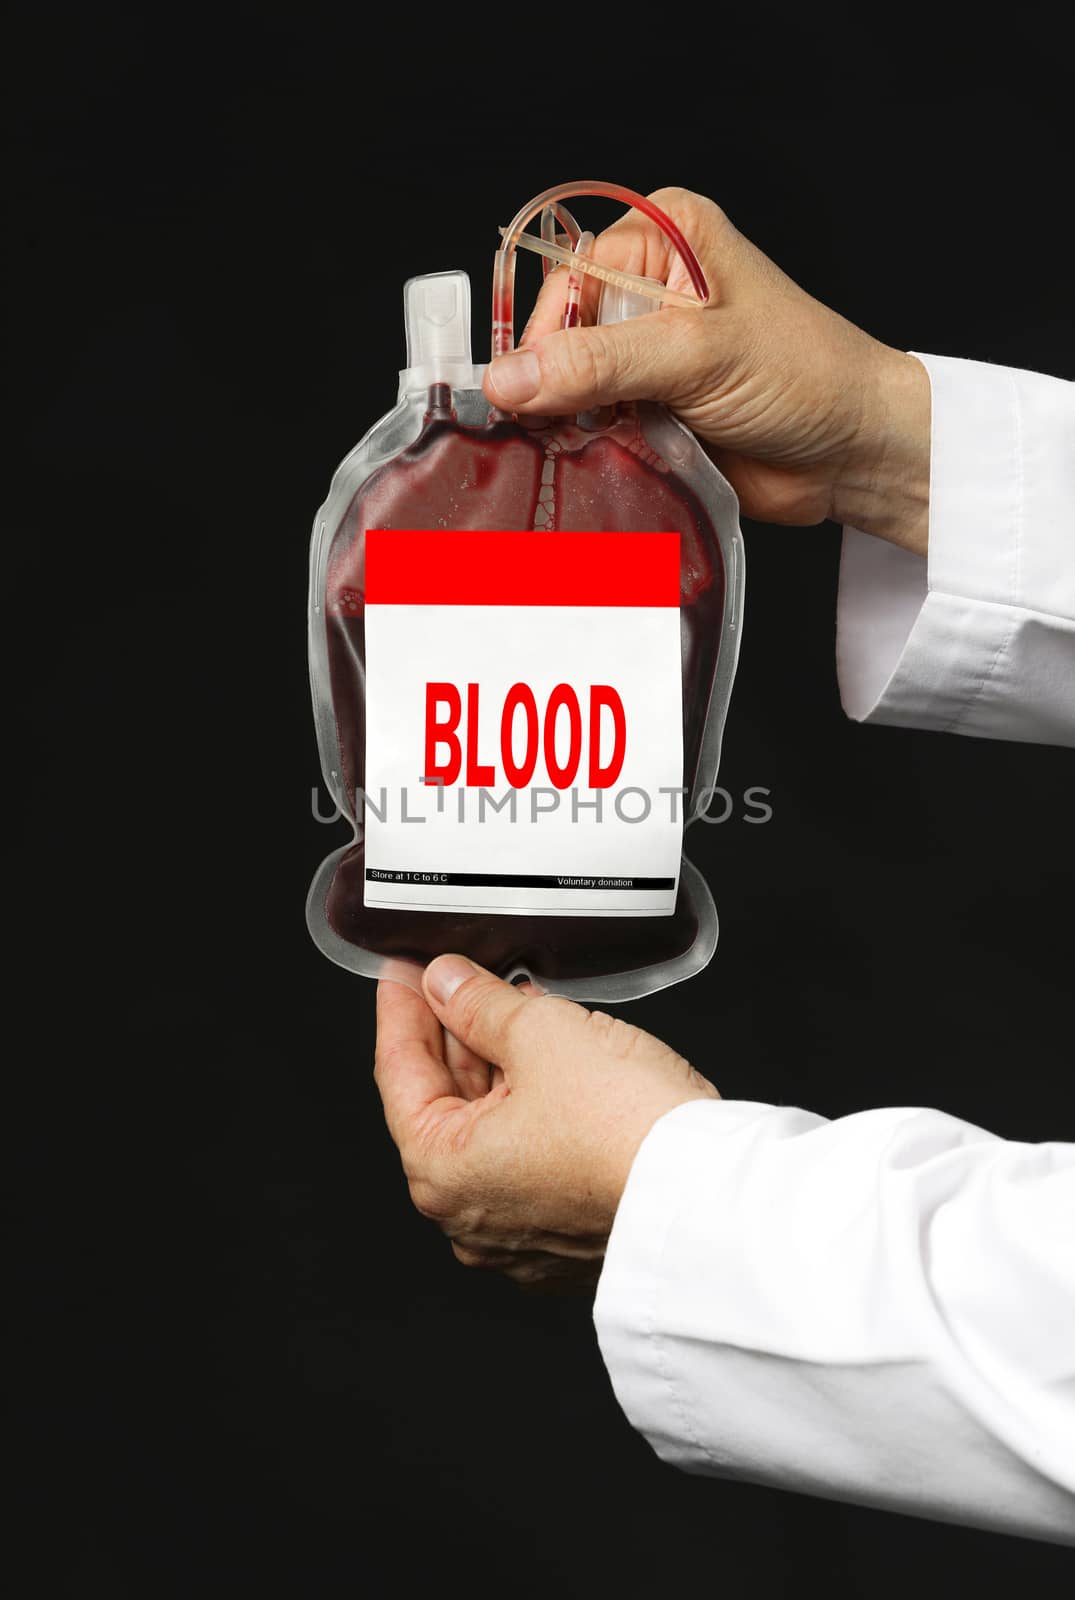 A man with white coat holding a blood transfusion bag. Isolated on dark background